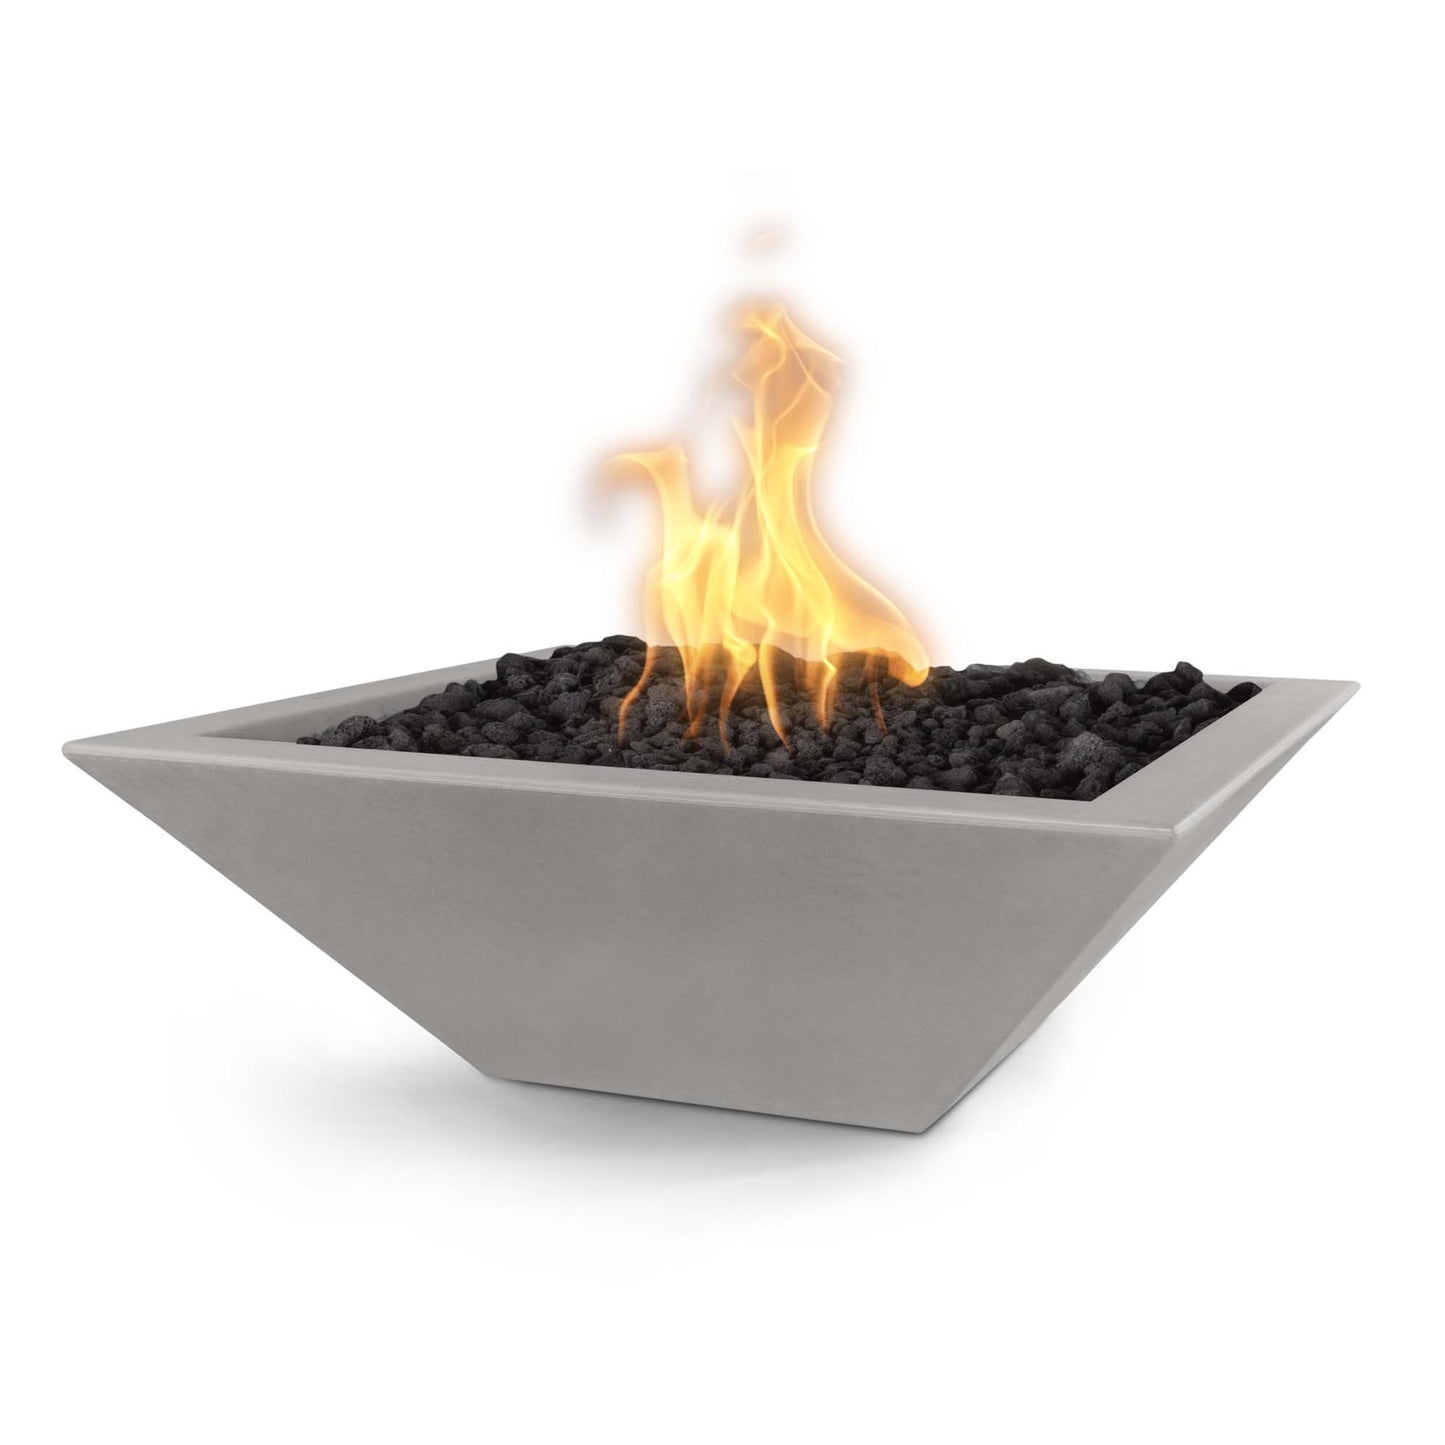 The Outdoor Plus Square Maya 24" Chocolate GFRC Concrete Natural Gas Fire Bowl with Match Lit with Flame Sense Ignition